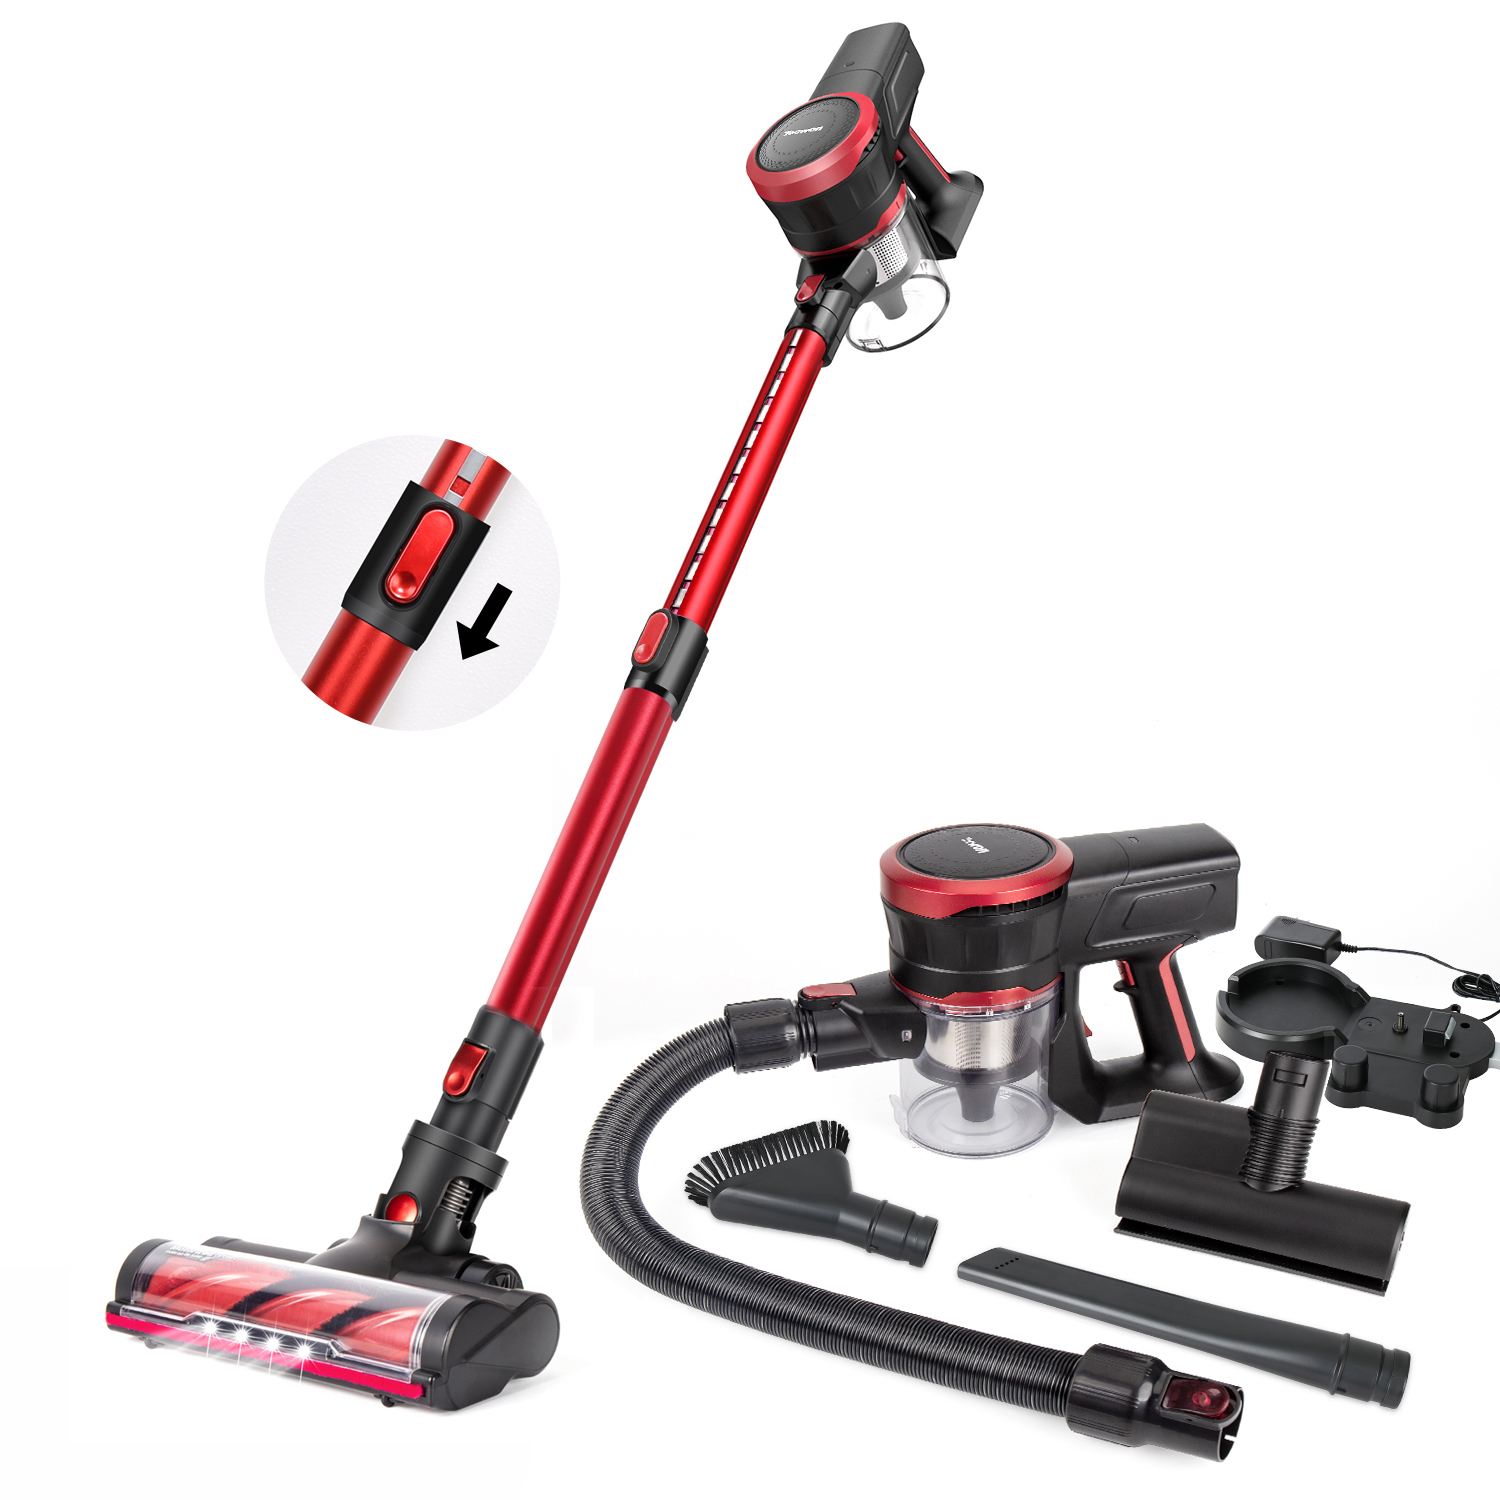 MOOSOO Cordless Vacuum 23Kpa Quiet Yet Powerful, Lightweight Stick Vacuum Cleaner with Rich Accessories, K17 - image 1 of 9